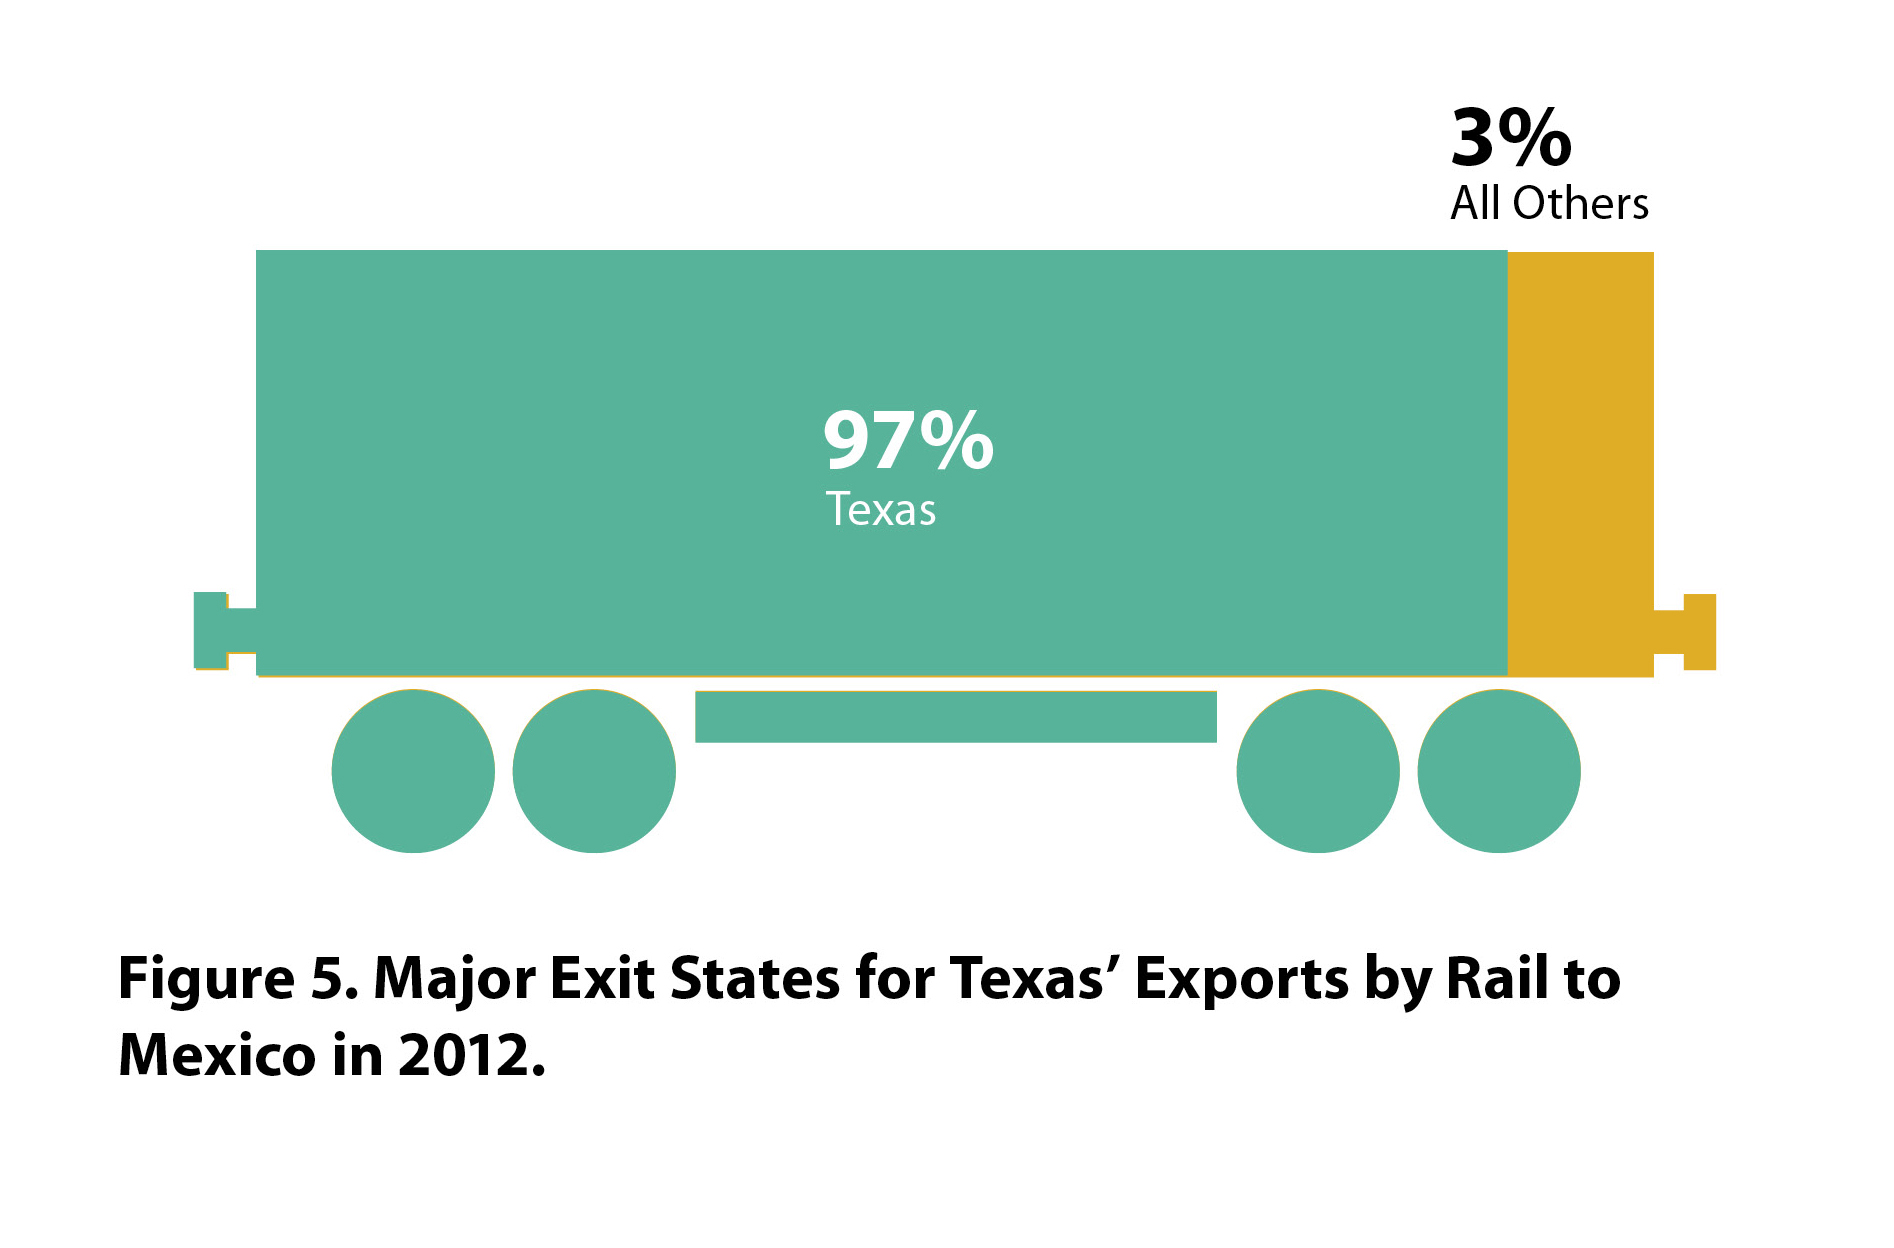 Major Exit States for Texas' Exports by Rail to Mexico in 2012